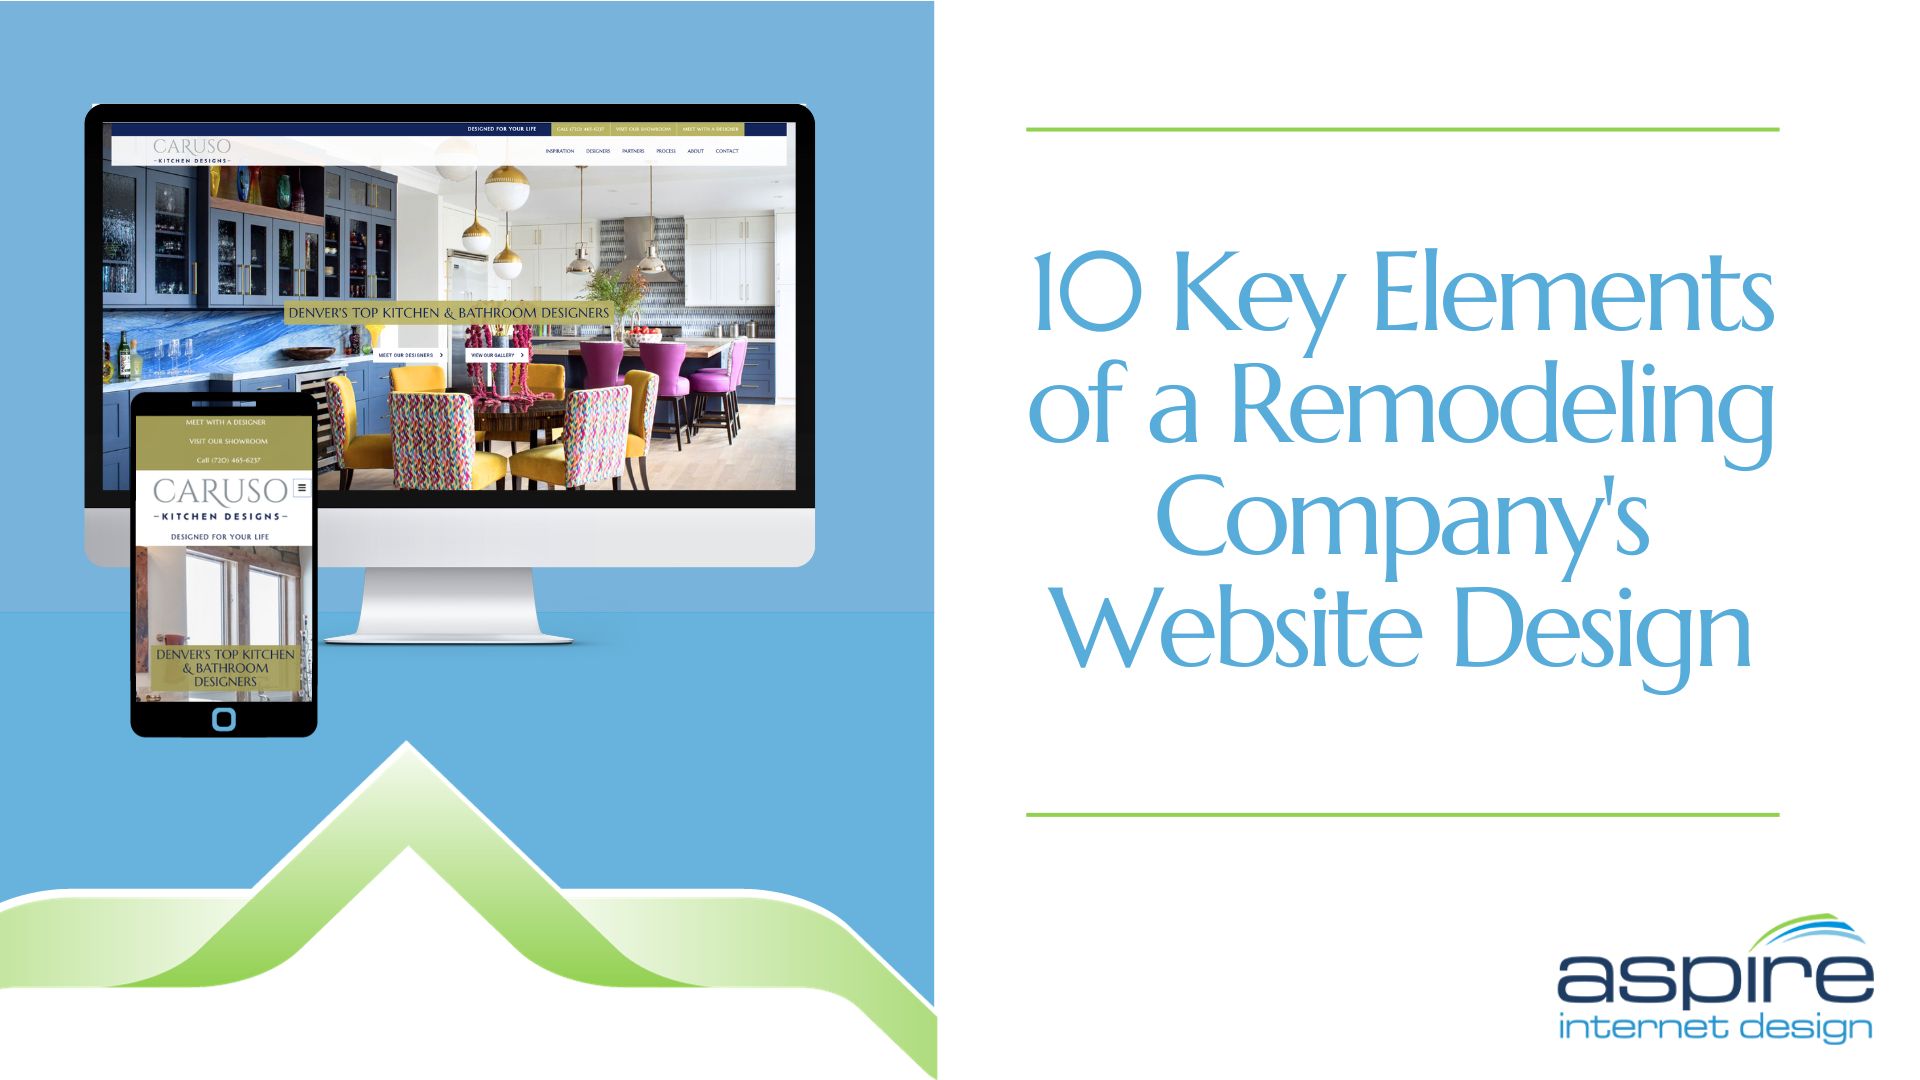 10 Key Elements of a Remodeling Company's Website Design